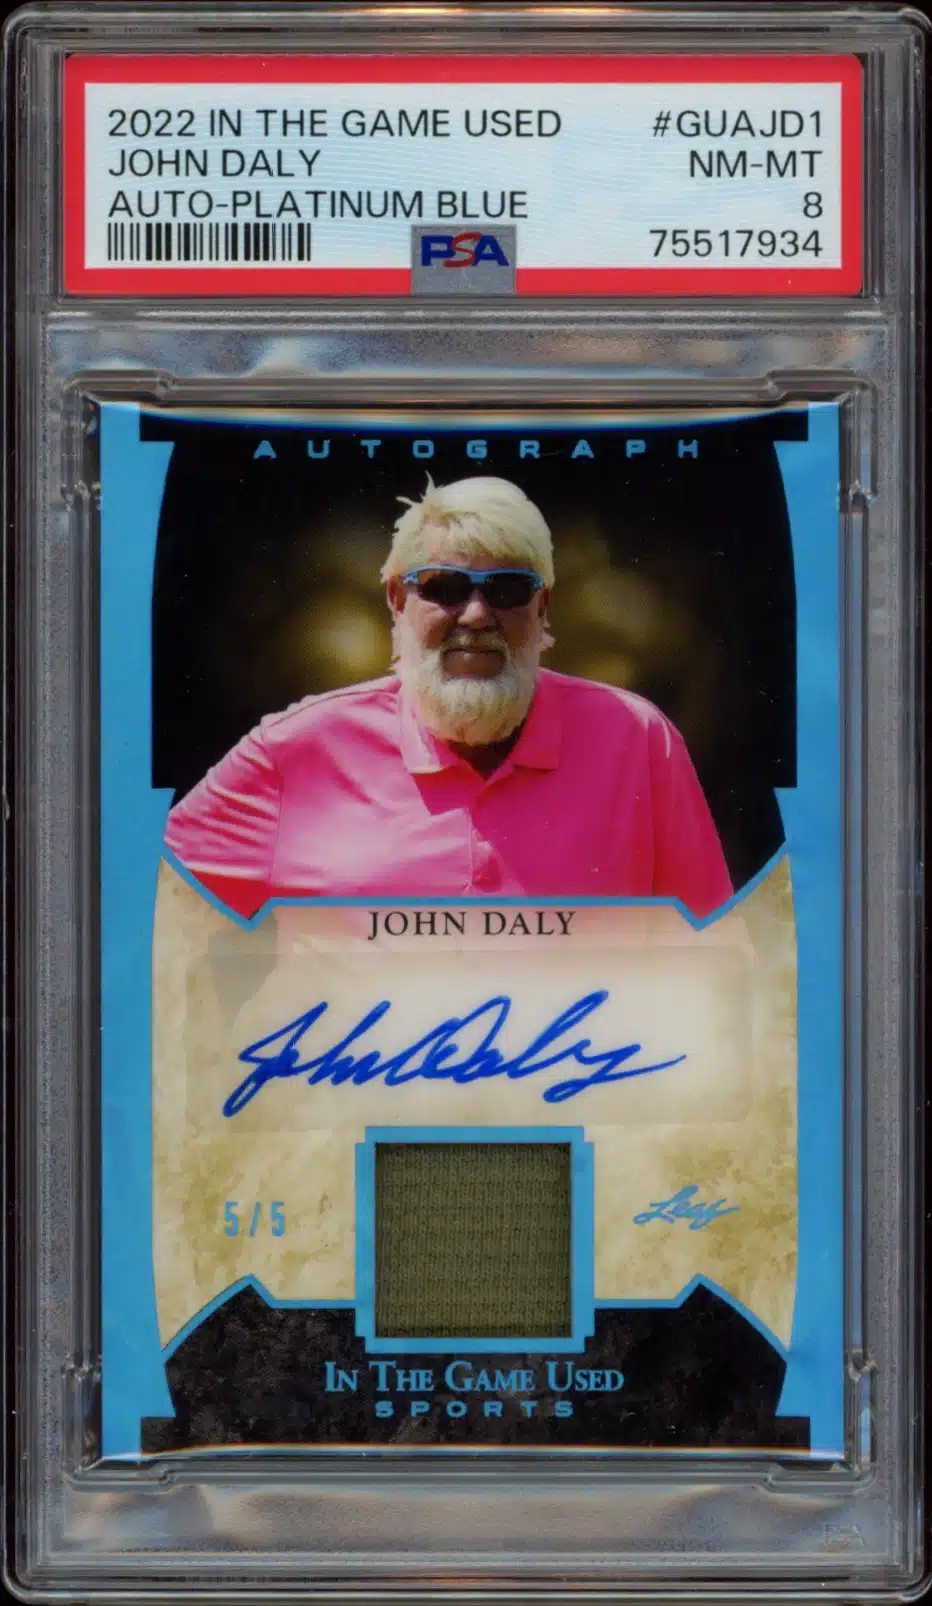 2022 Leaf In The Game Used Sports John Daly #GUA-JD1 (/5) (Auto) (PSA 8) (Front)